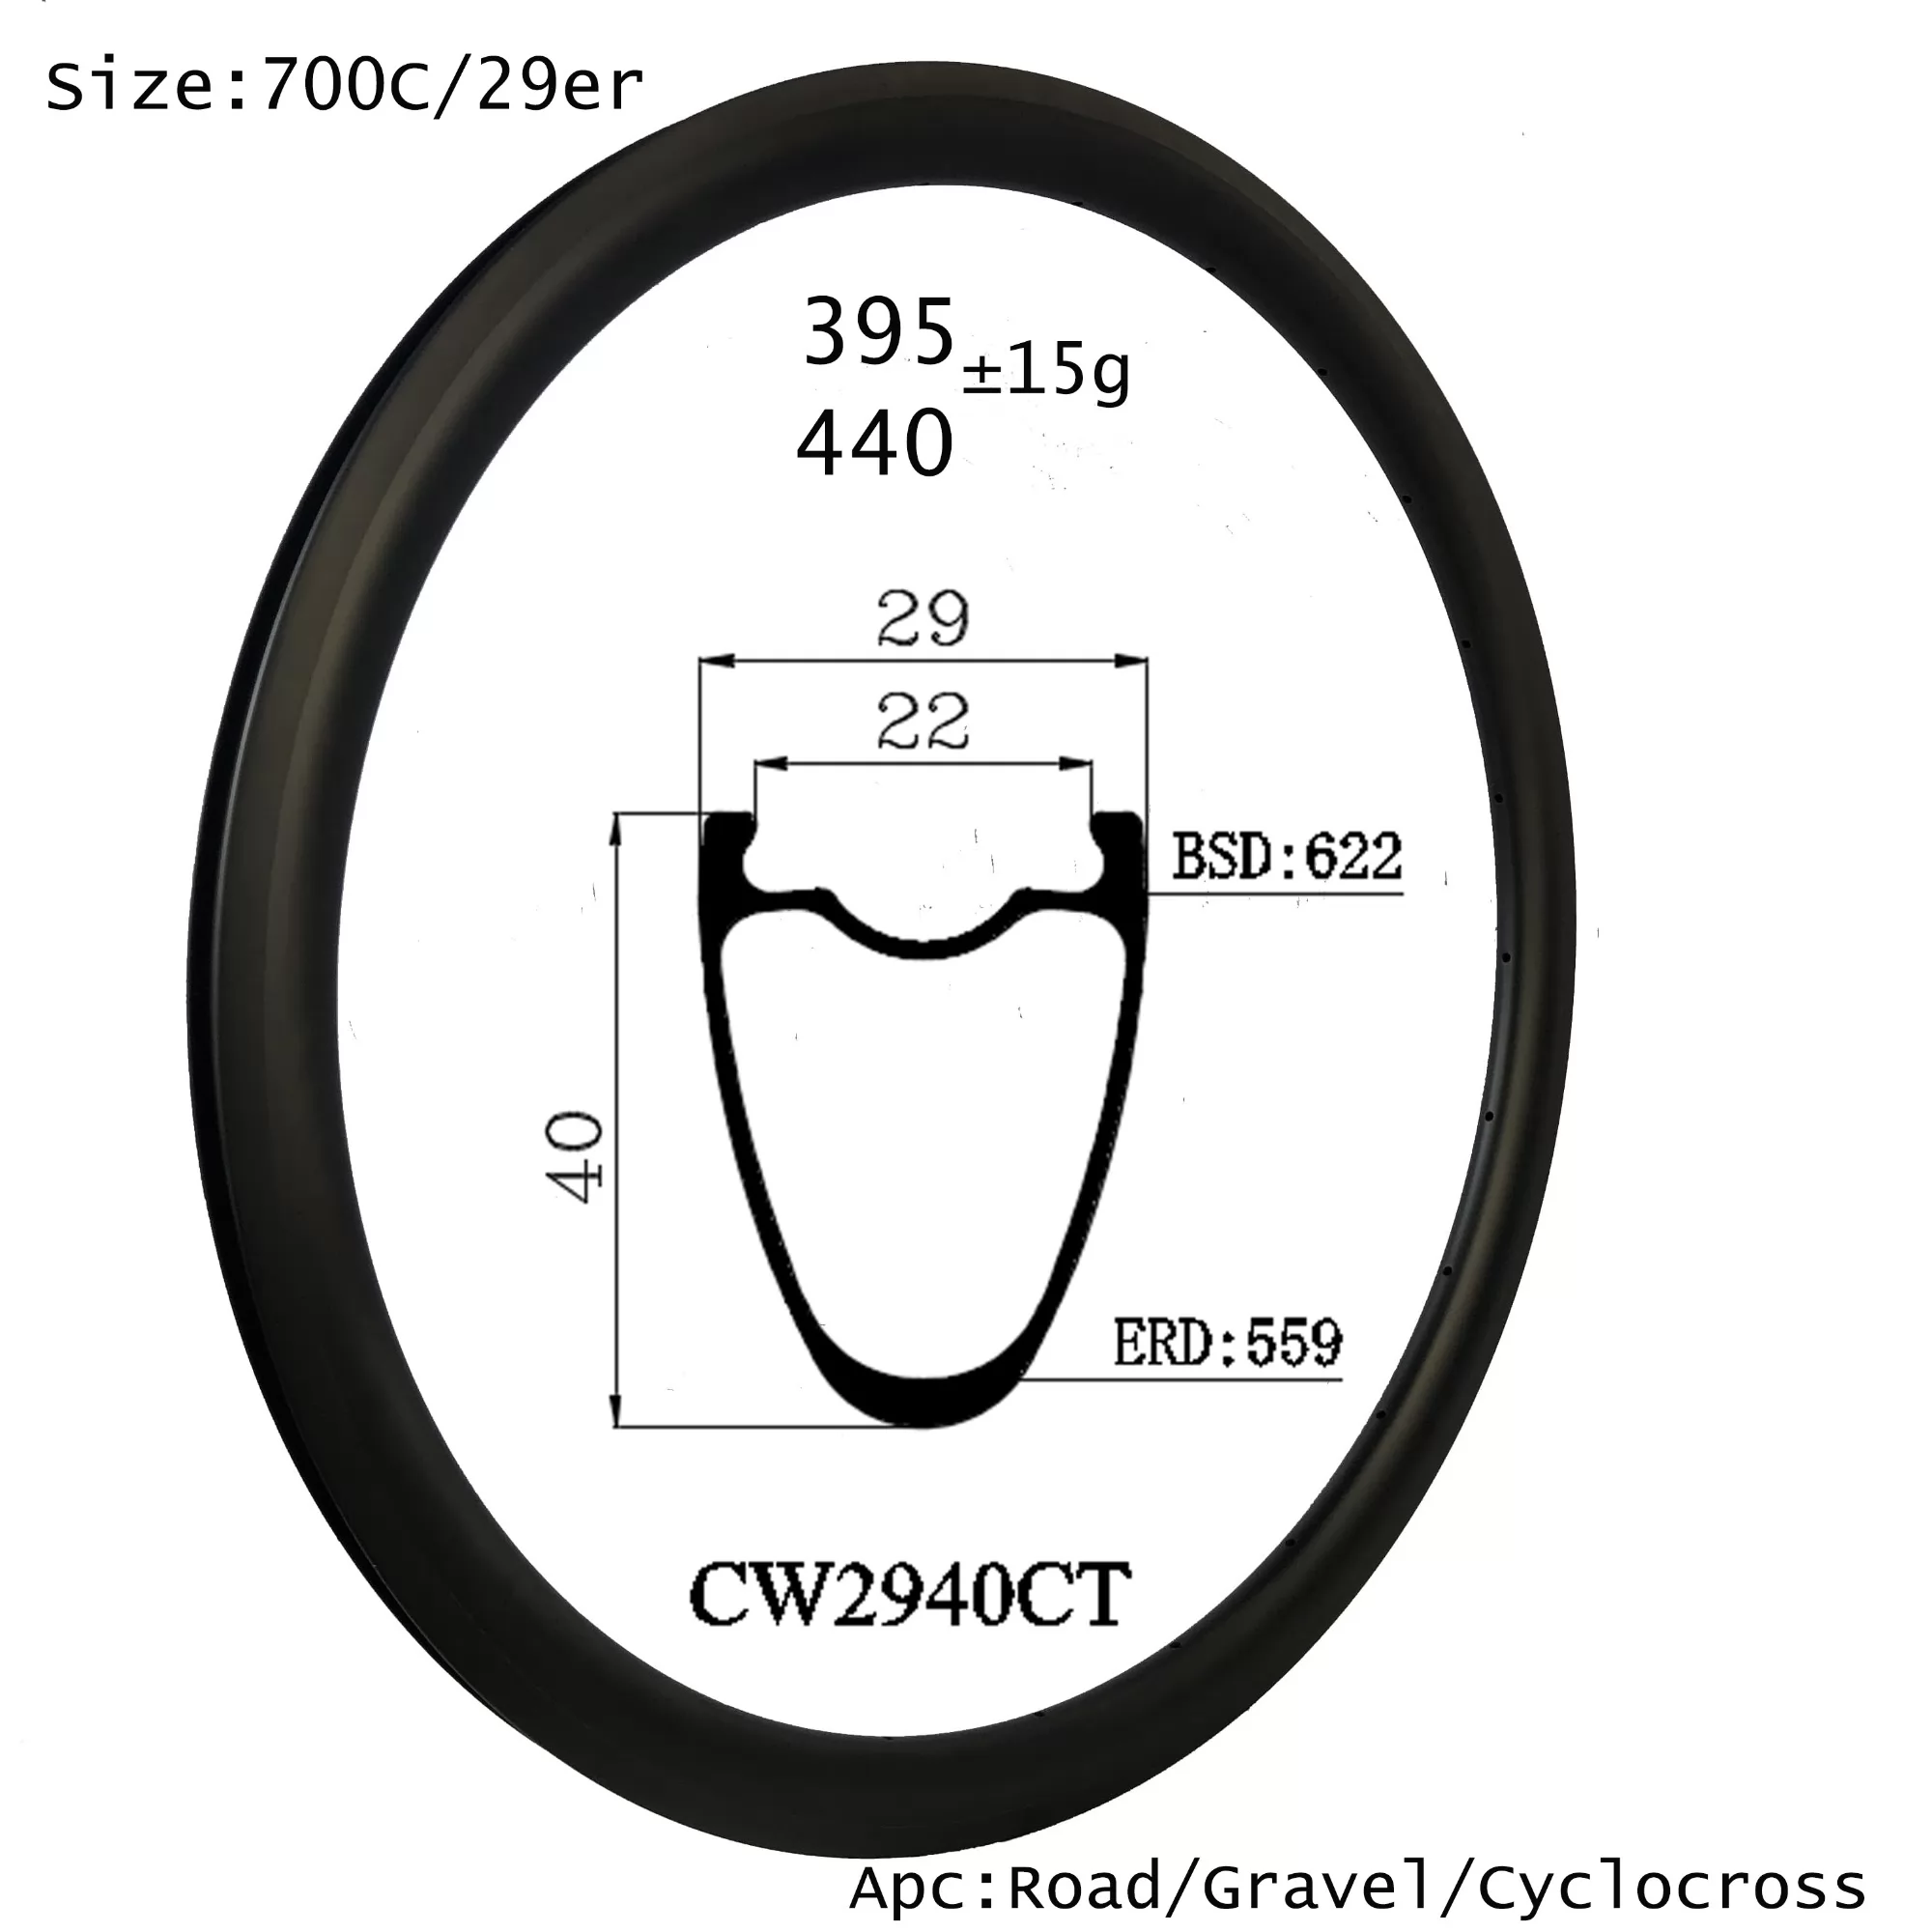 |CW2940CT| 700C/29er gravel bike carbon rims 29X40mm disc brake/V brake available hot sales to the Italian cycle teams